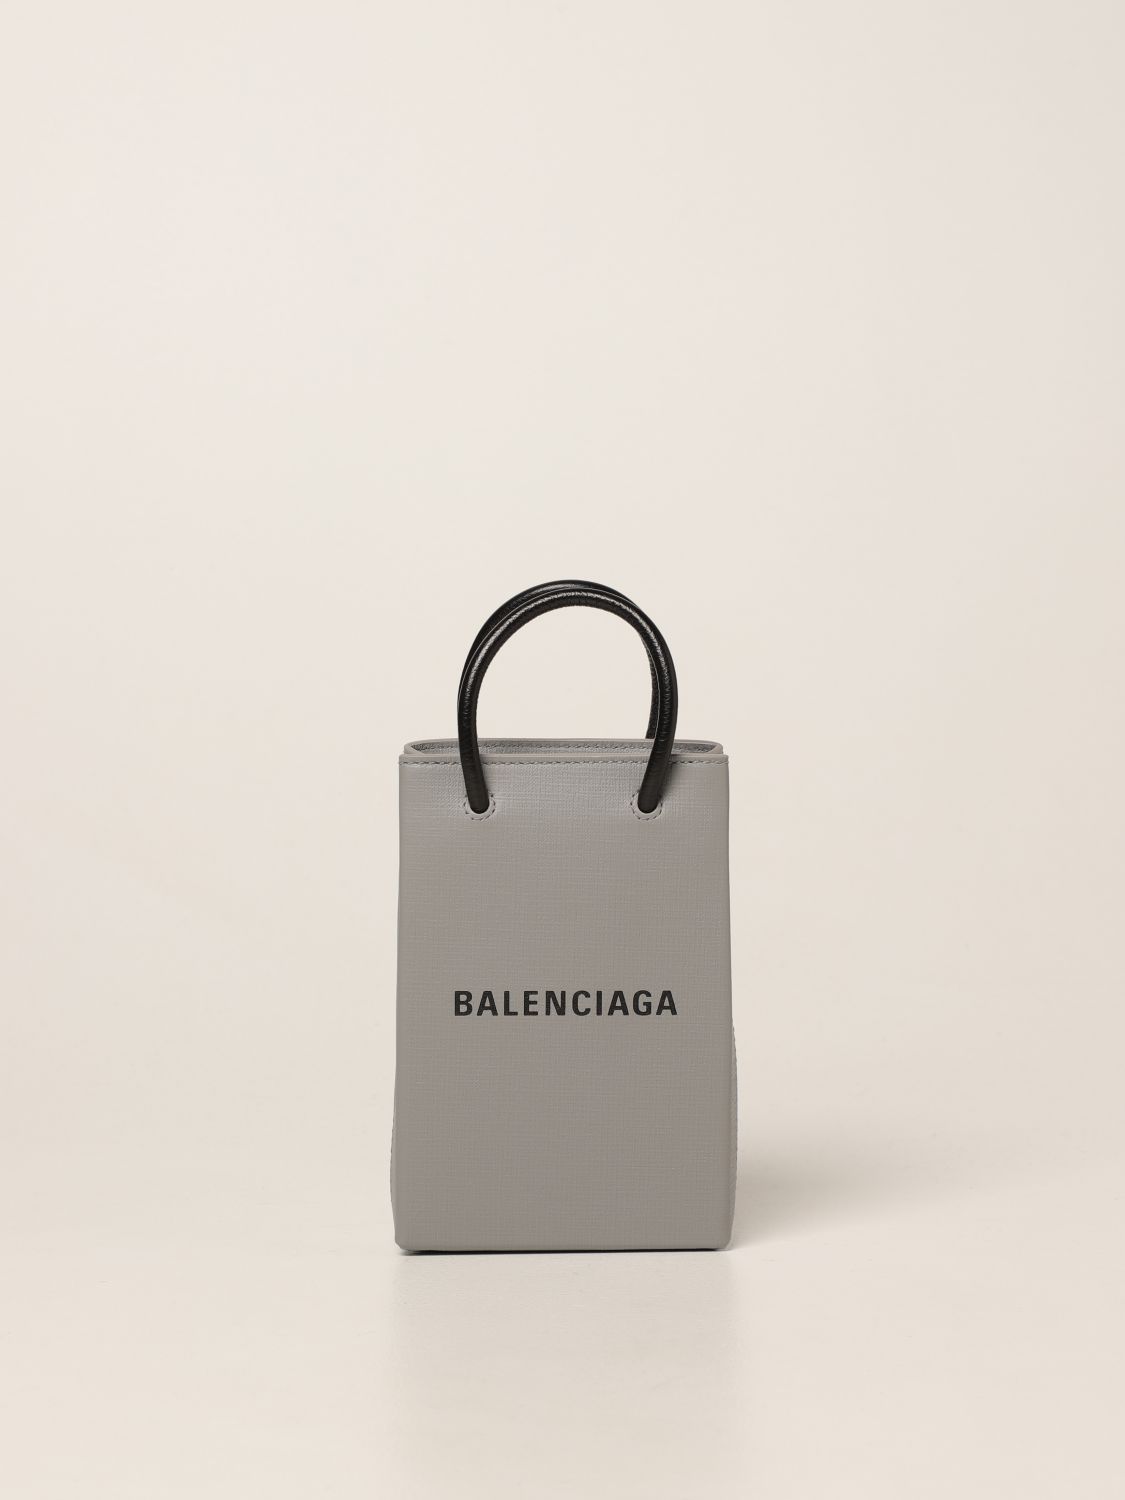 6046 Balenciaga Sneakers Stock Photos HighRes Pictures and Images   Getty Images